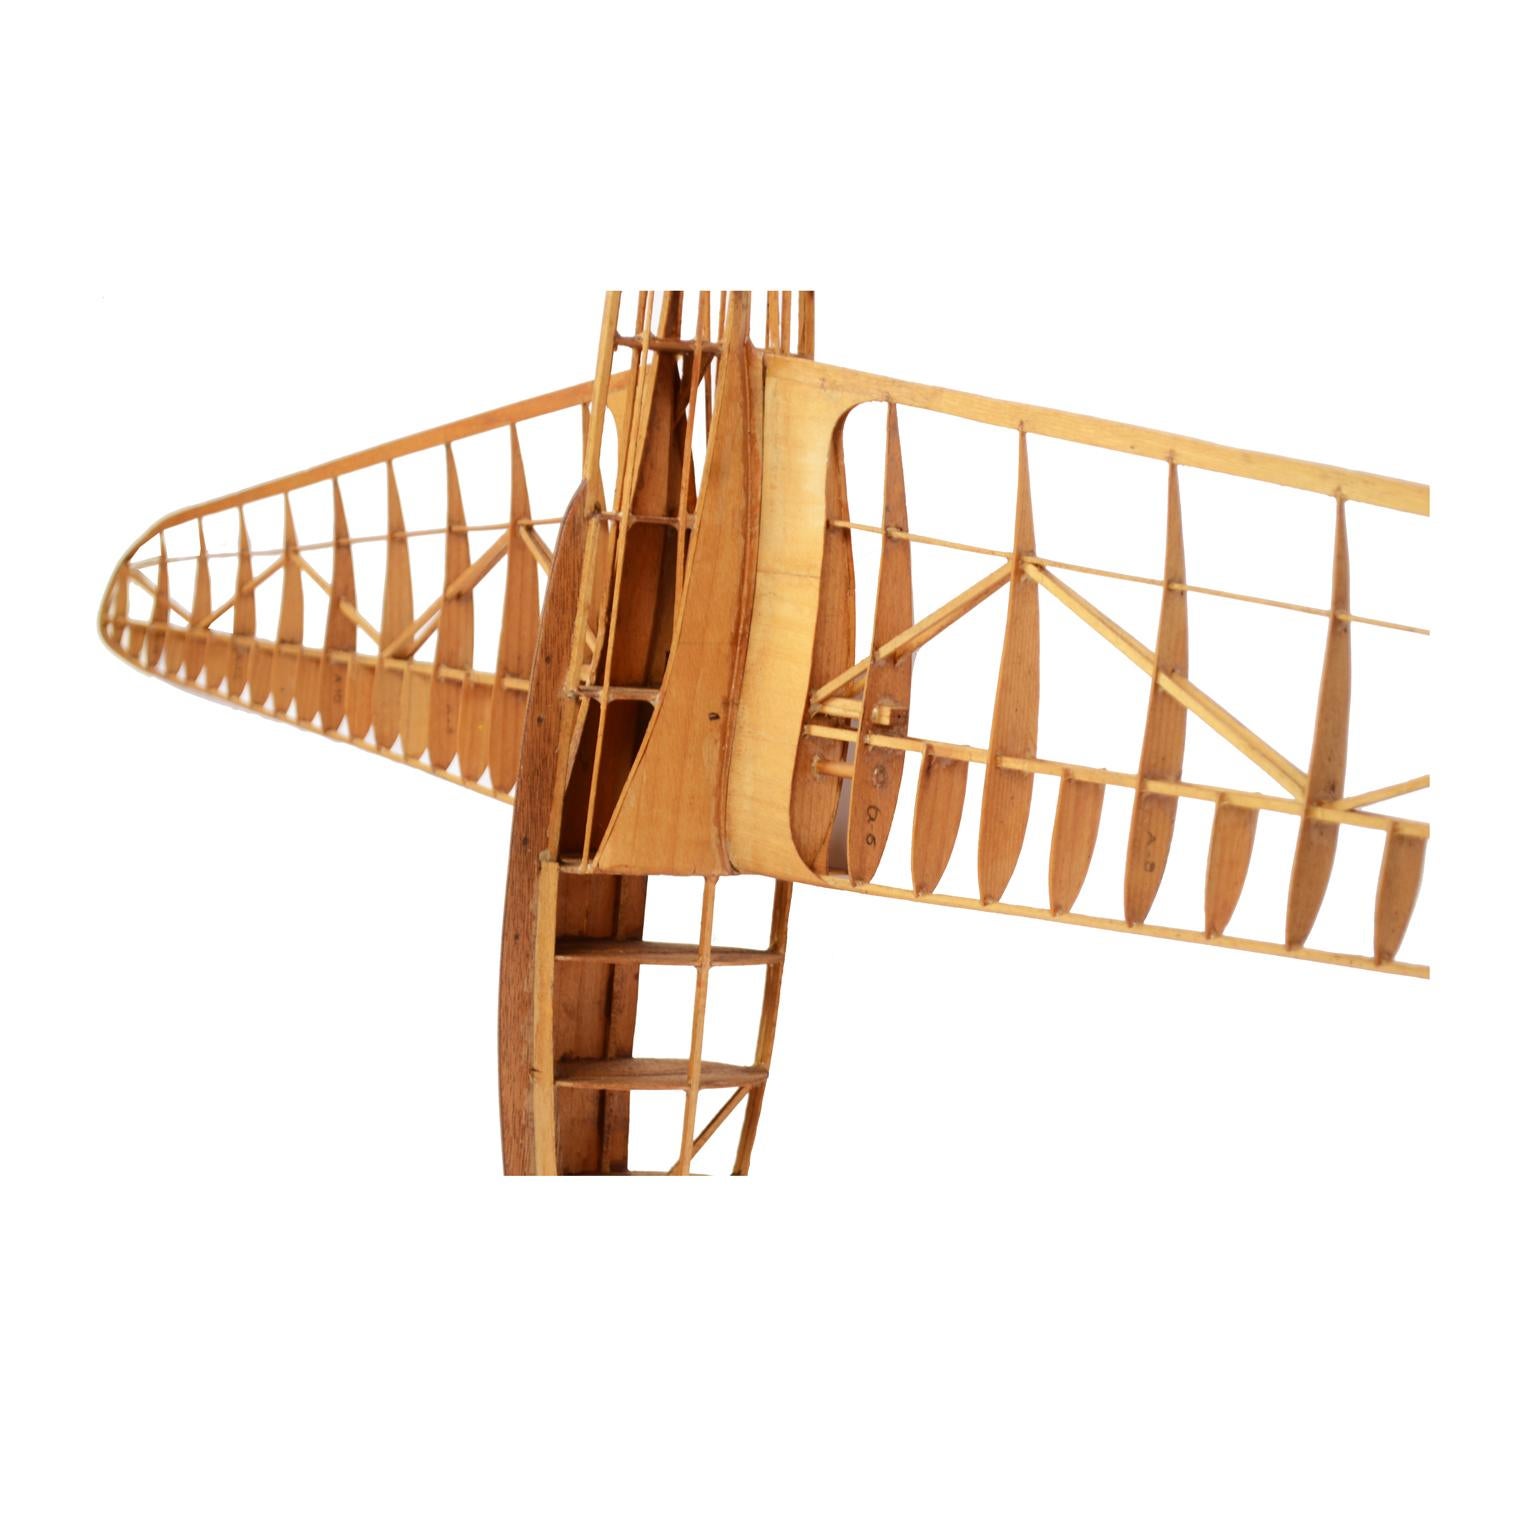 Scale Model of the Structure of a Passenger Airplane 2